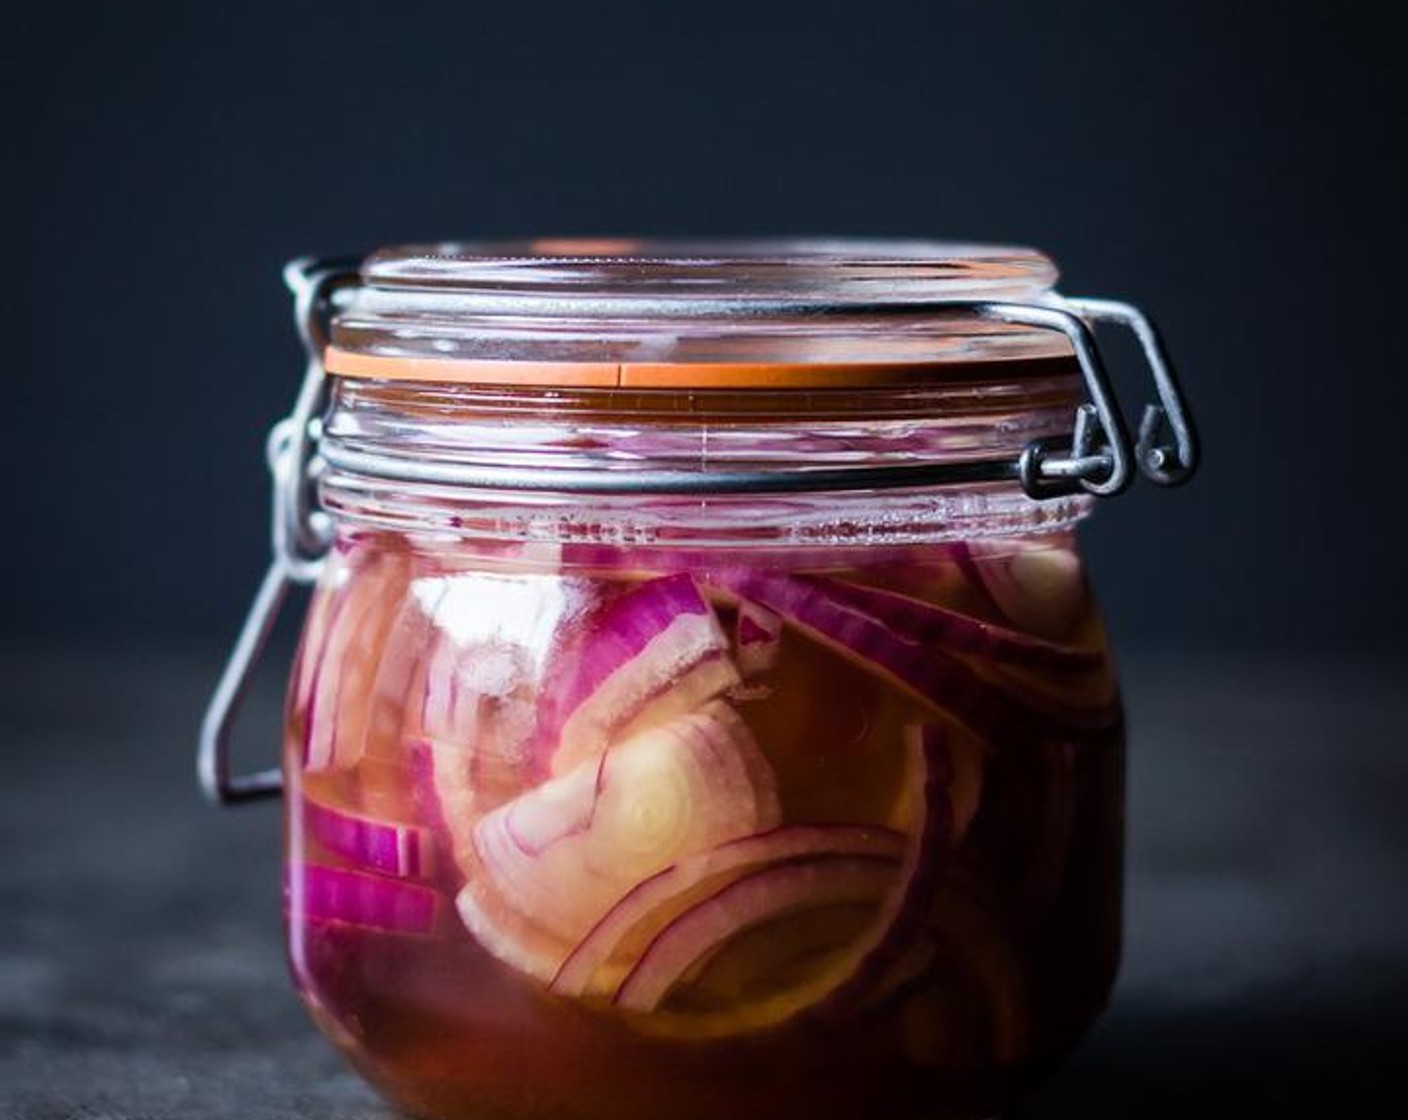 step 3 Add the Distilled White Vinegar (1/2 cup) to the hot water mixture, stir to combine and pour liquid over the red onions in the jar.